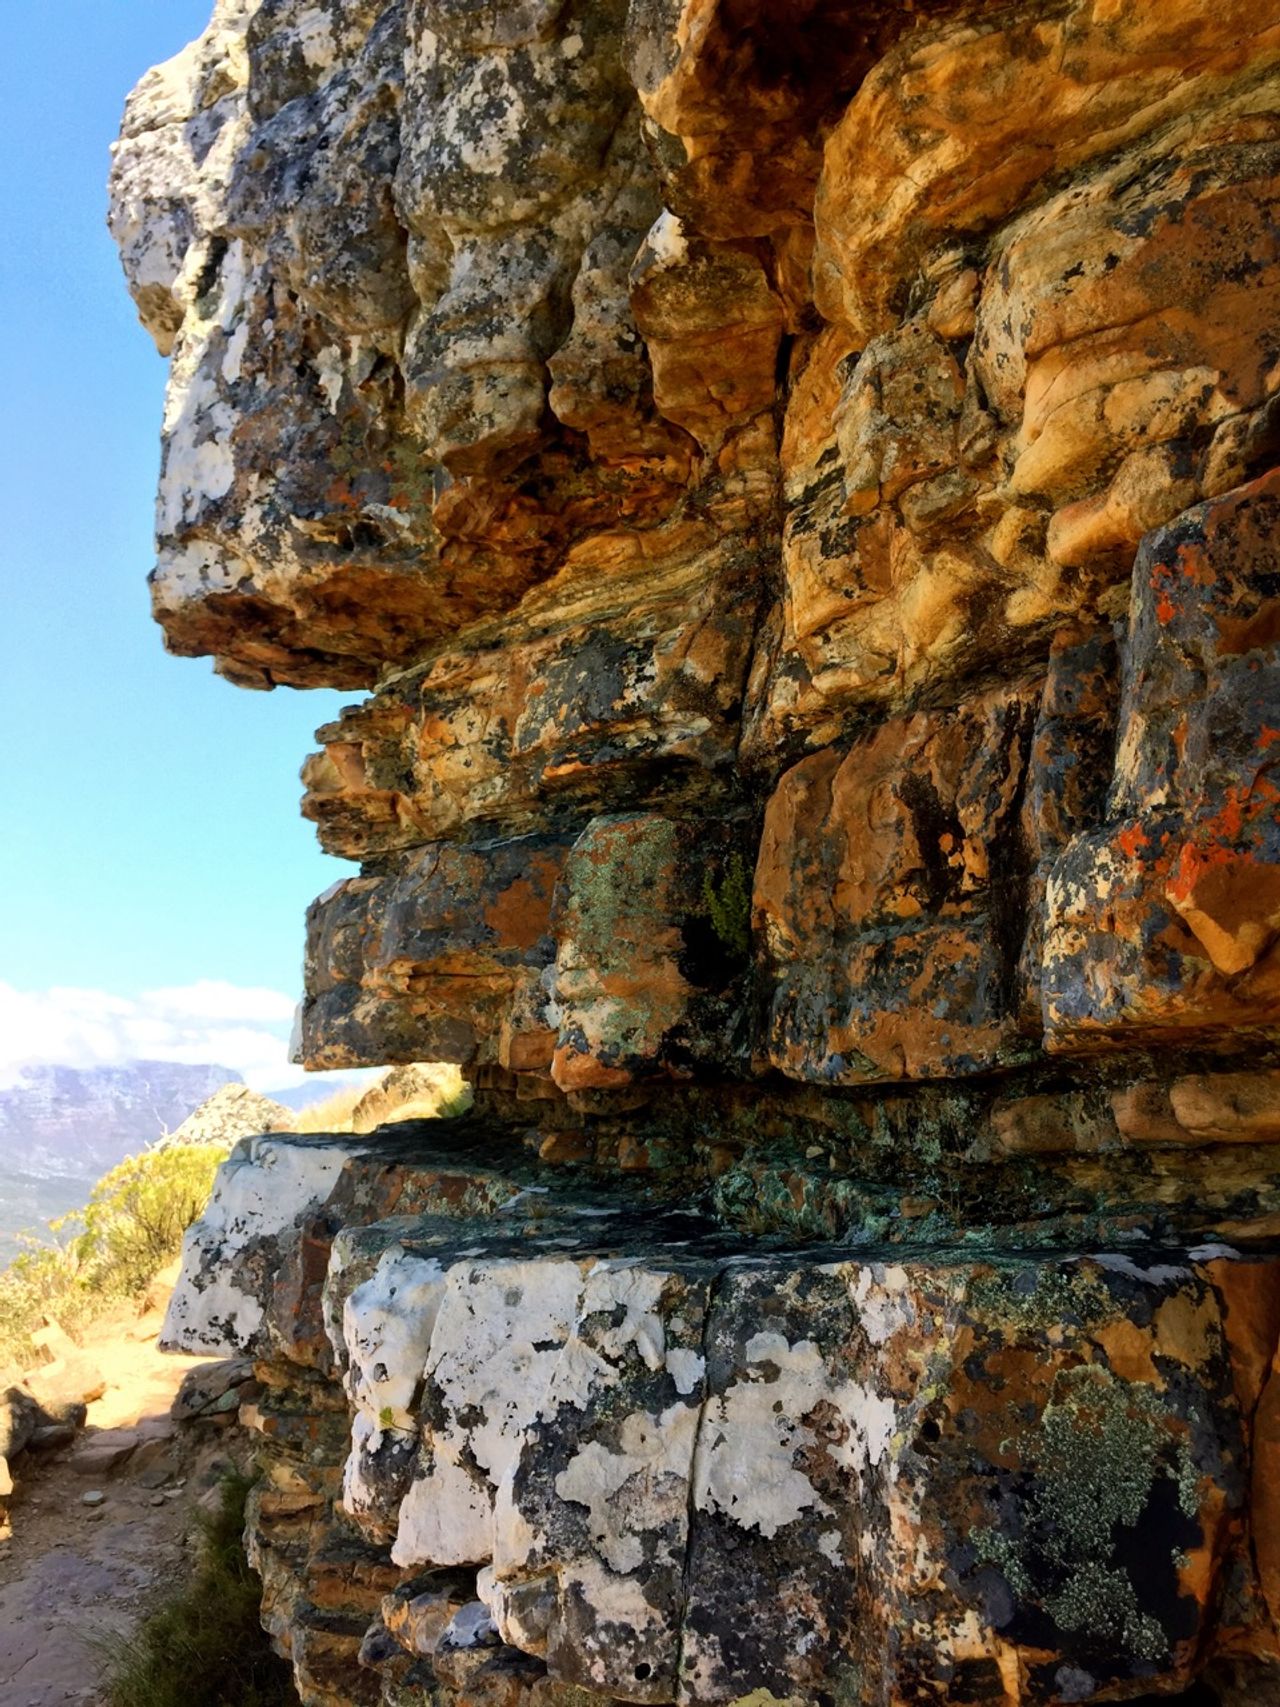 Colorful rocks on a mountain.